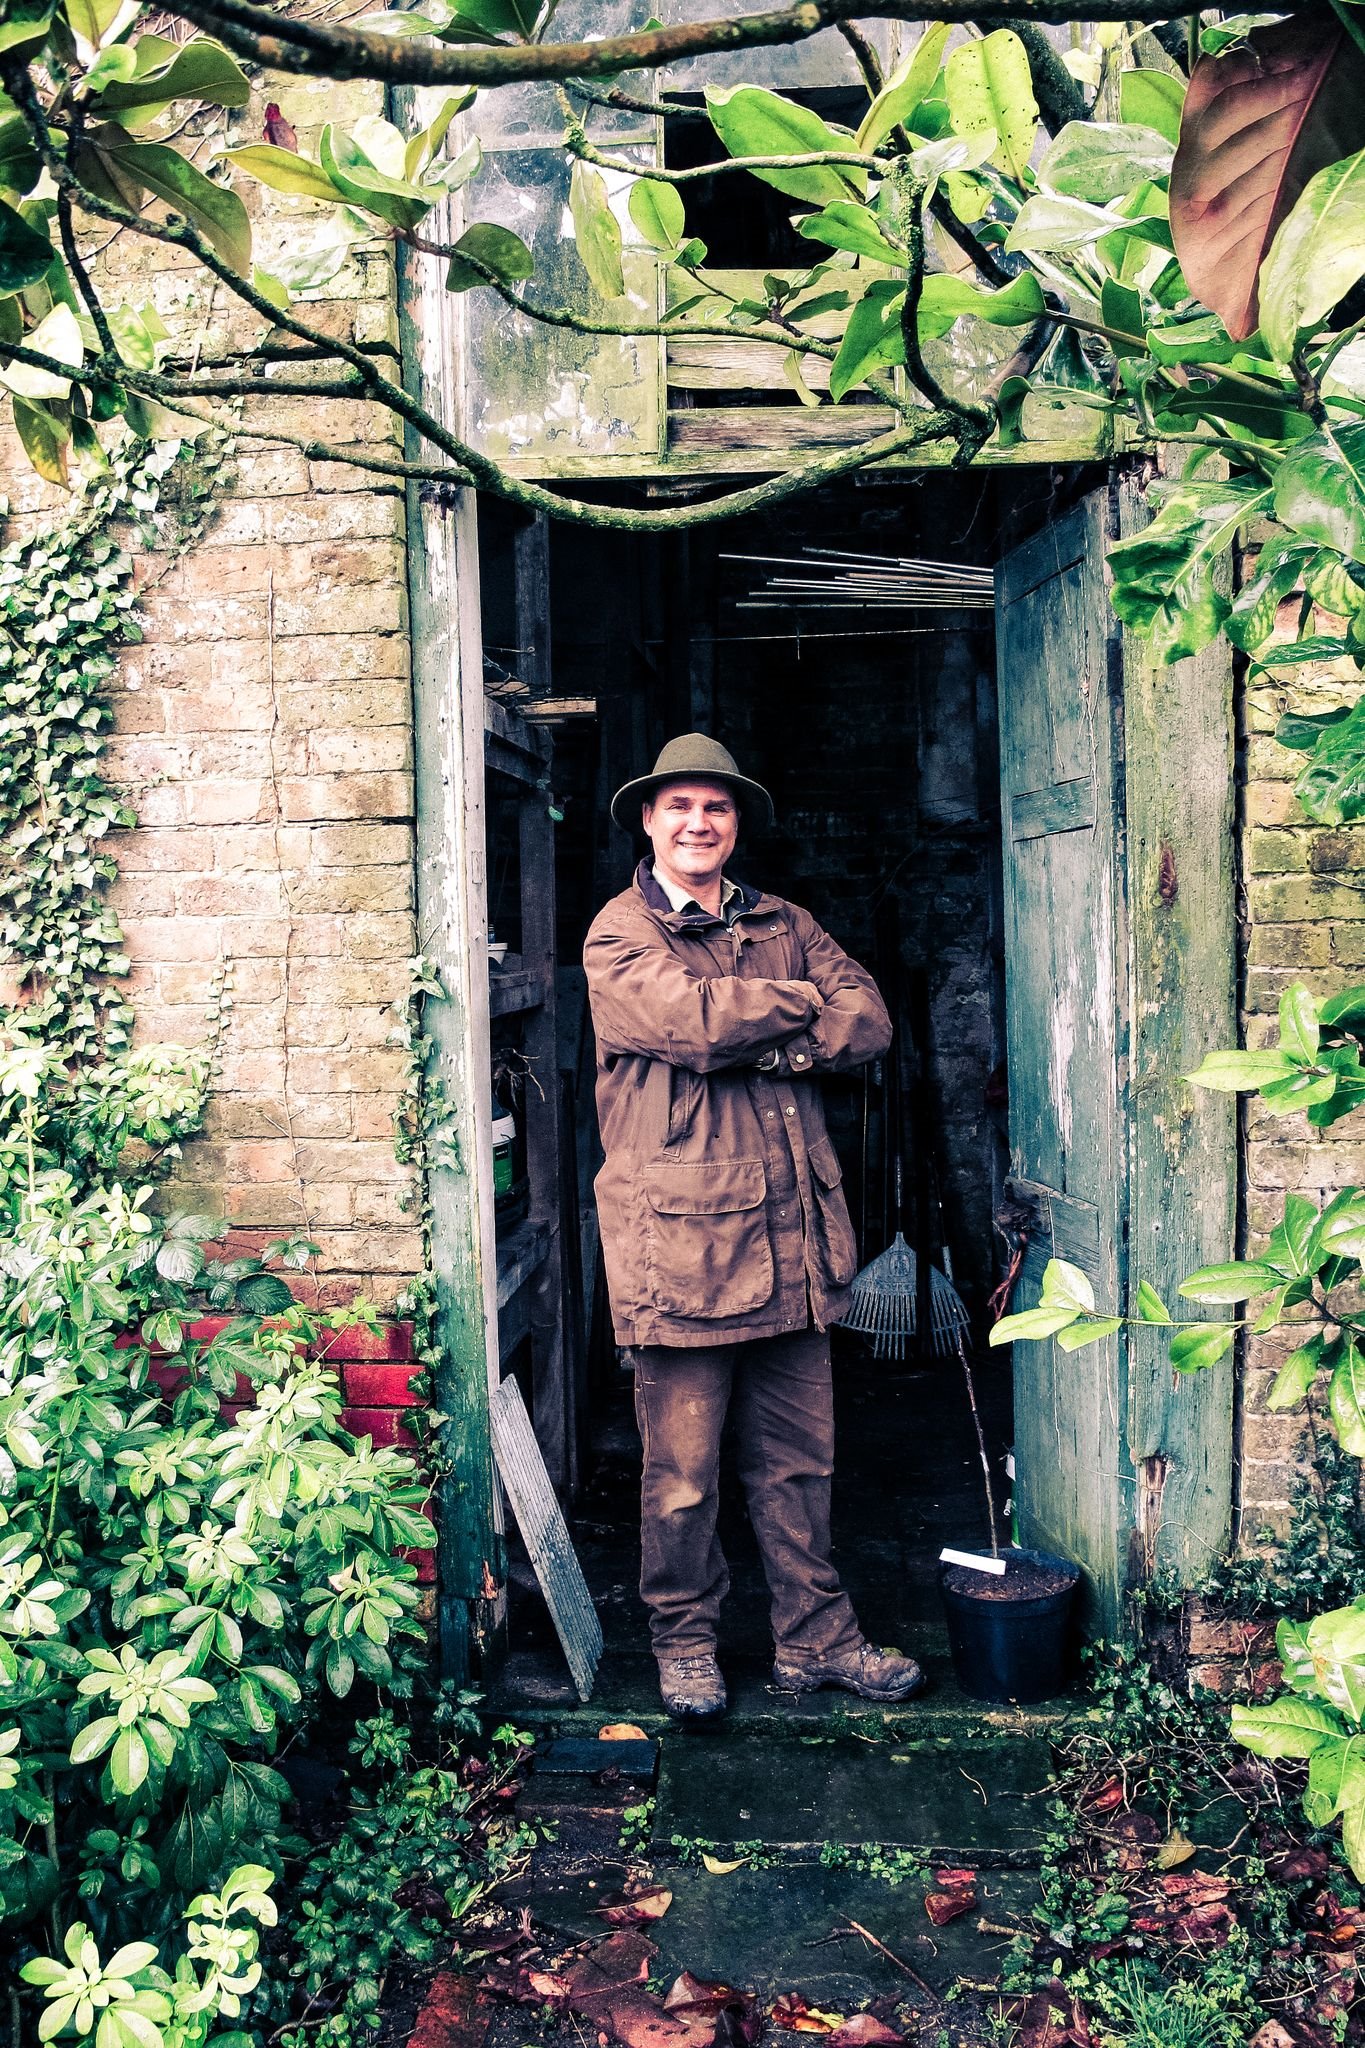 Chisholm when he was head gardener of the Elmore Court country estate 10 years ago